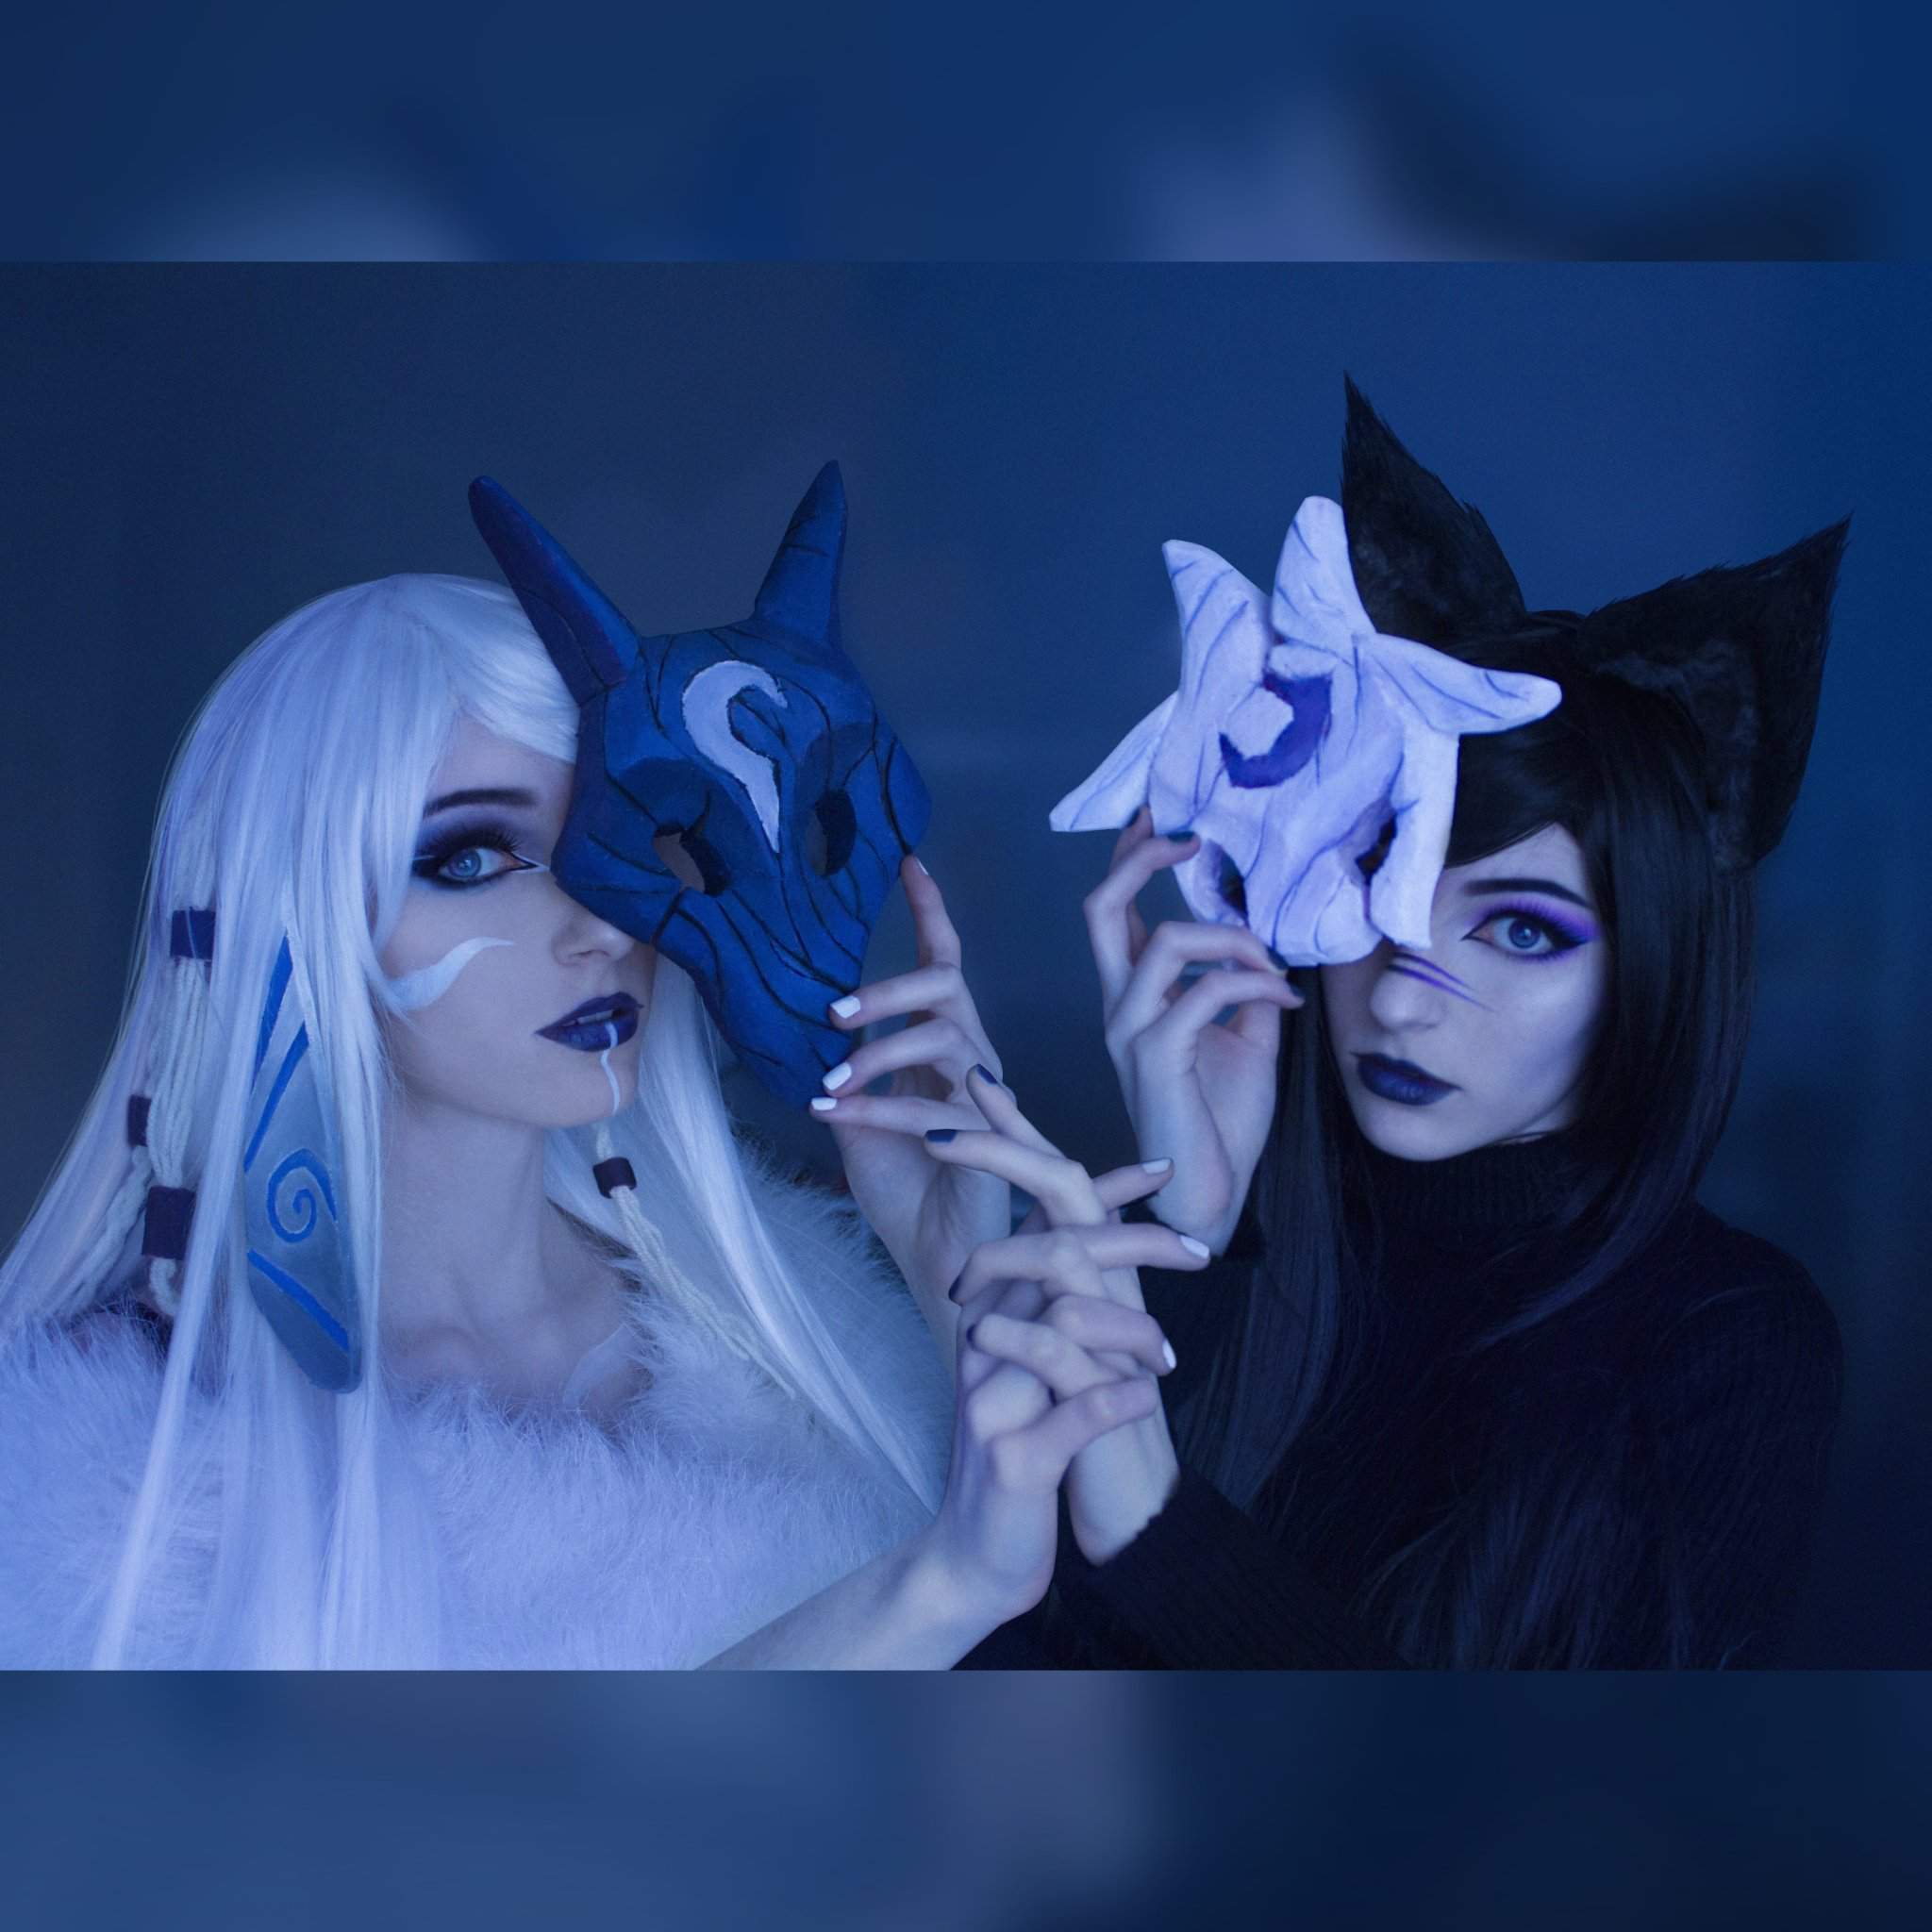 Kindred league of legends cosplay